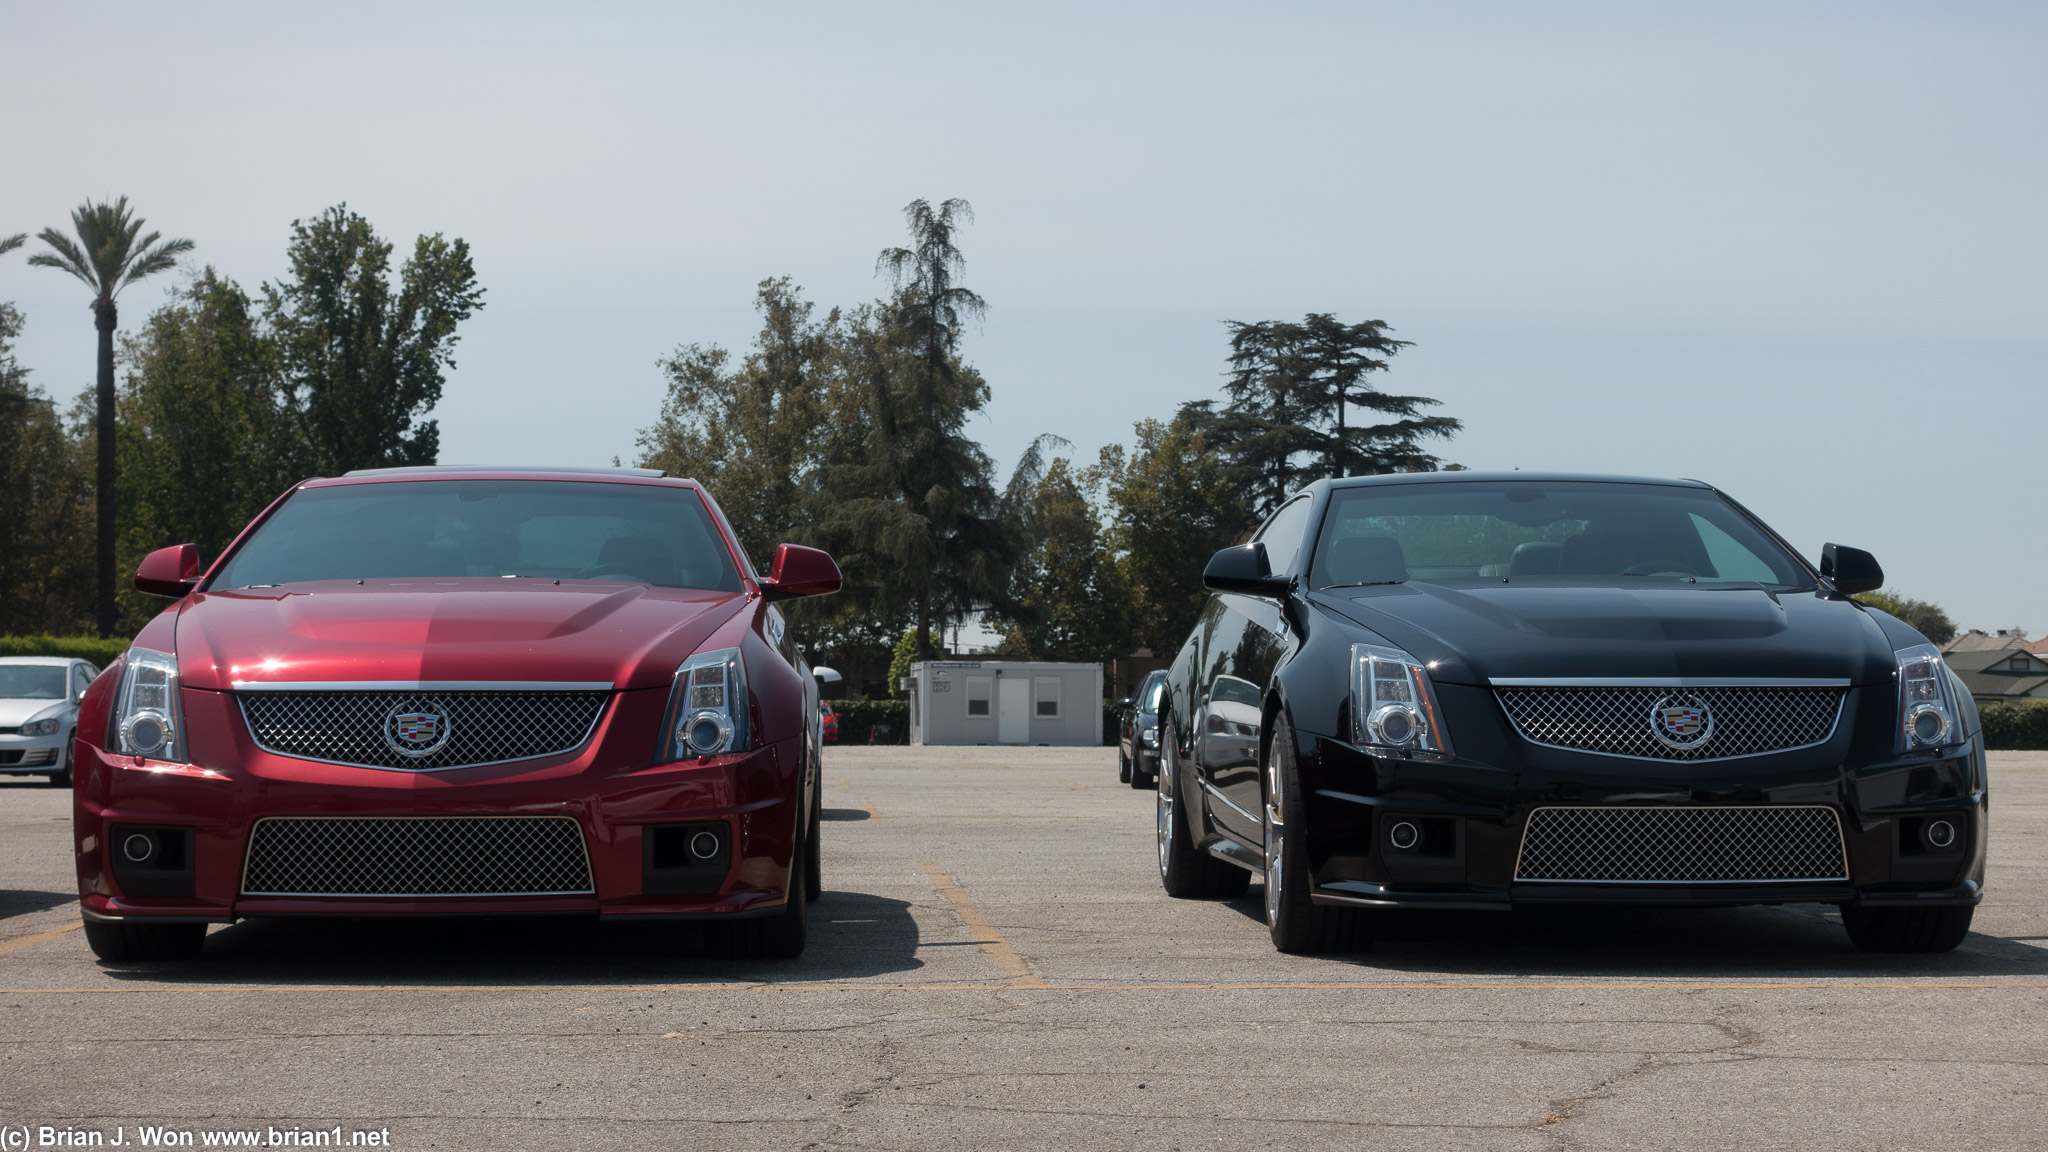 Not sure if these were visitors or employee-owned 2nd gen CTS-V coupes, but a bunch of the employees were SoCal locals....